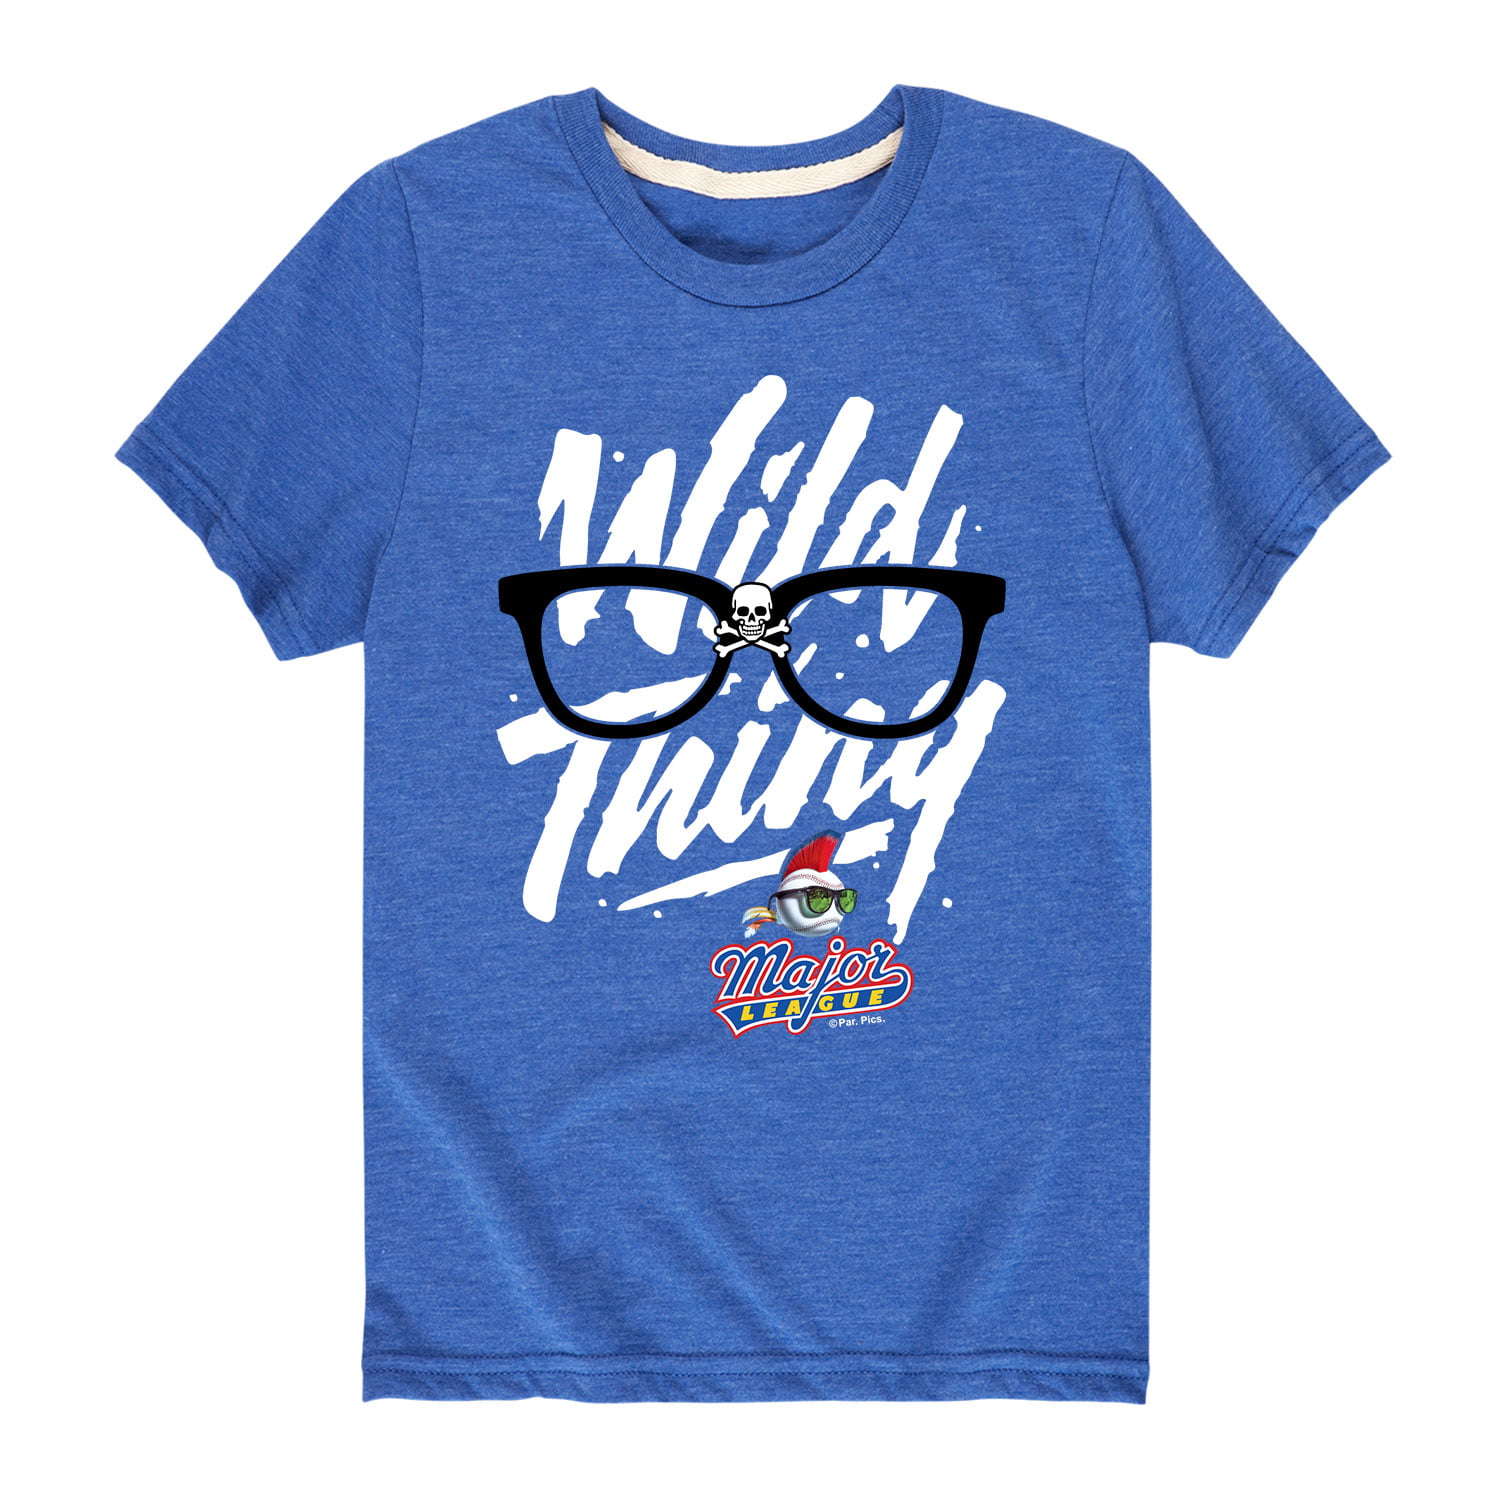 Major League - Wild Thing Glasses - Toddler and Youth Short Sleeve Graphic T-Shirt, Toddler Unisex, Size: Small, Blue